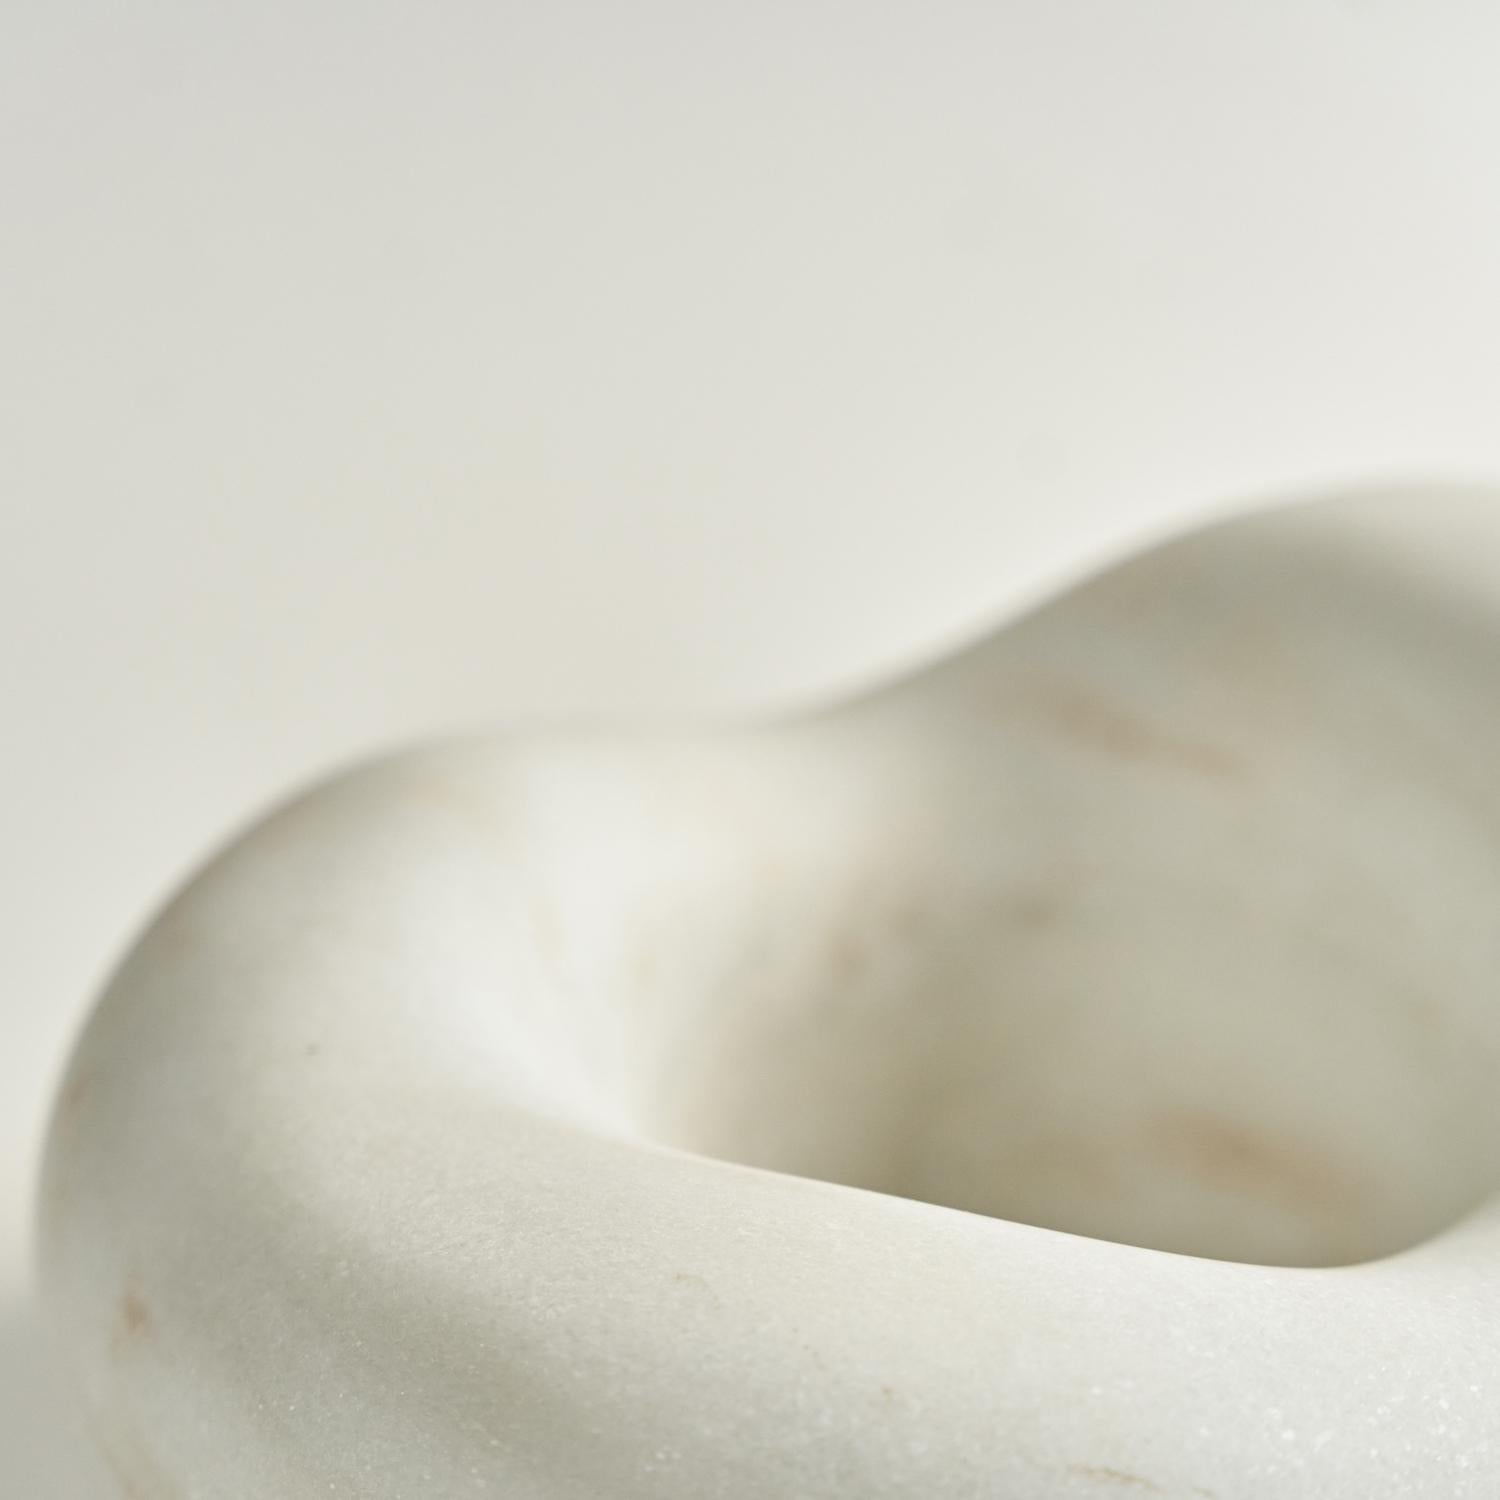 Marble Unda Form Sculpture by Dust and Form